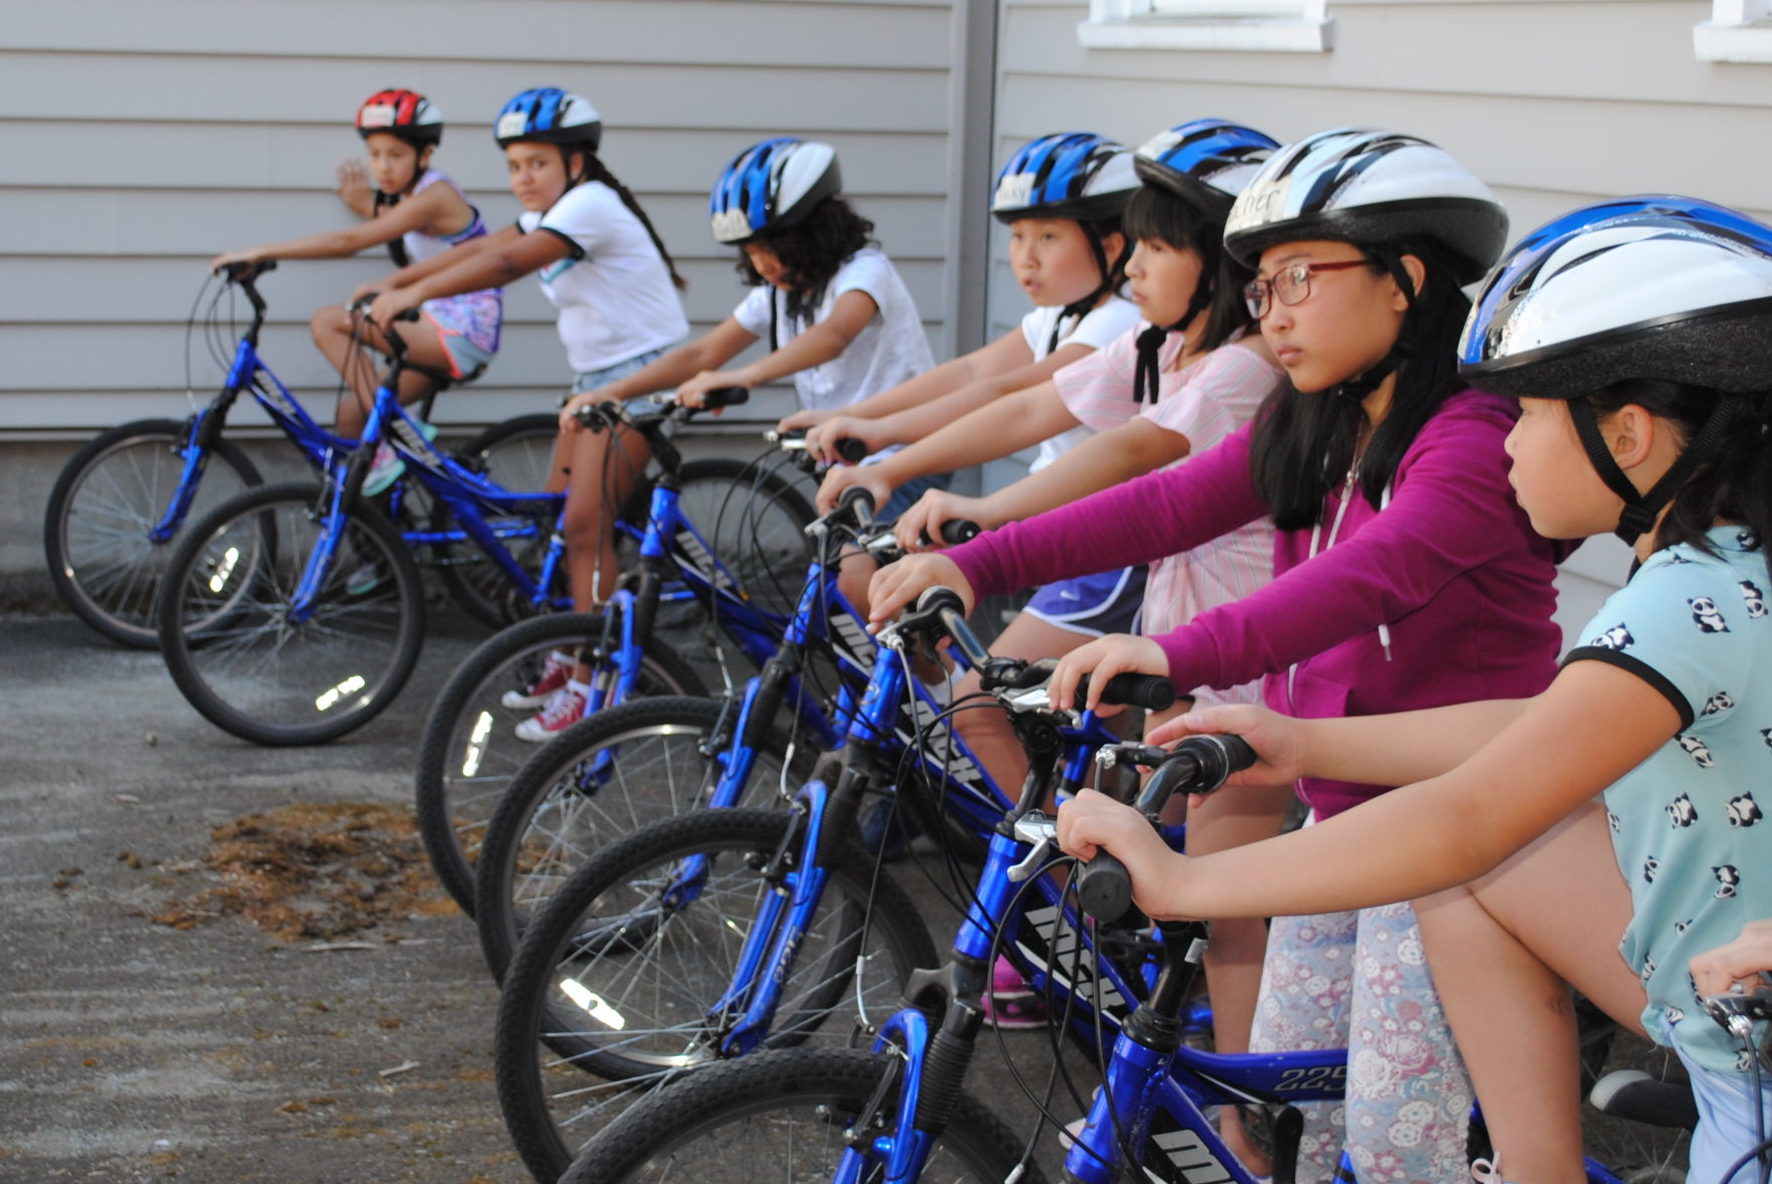 A group of children wearing helmets sit on bikes in a row.